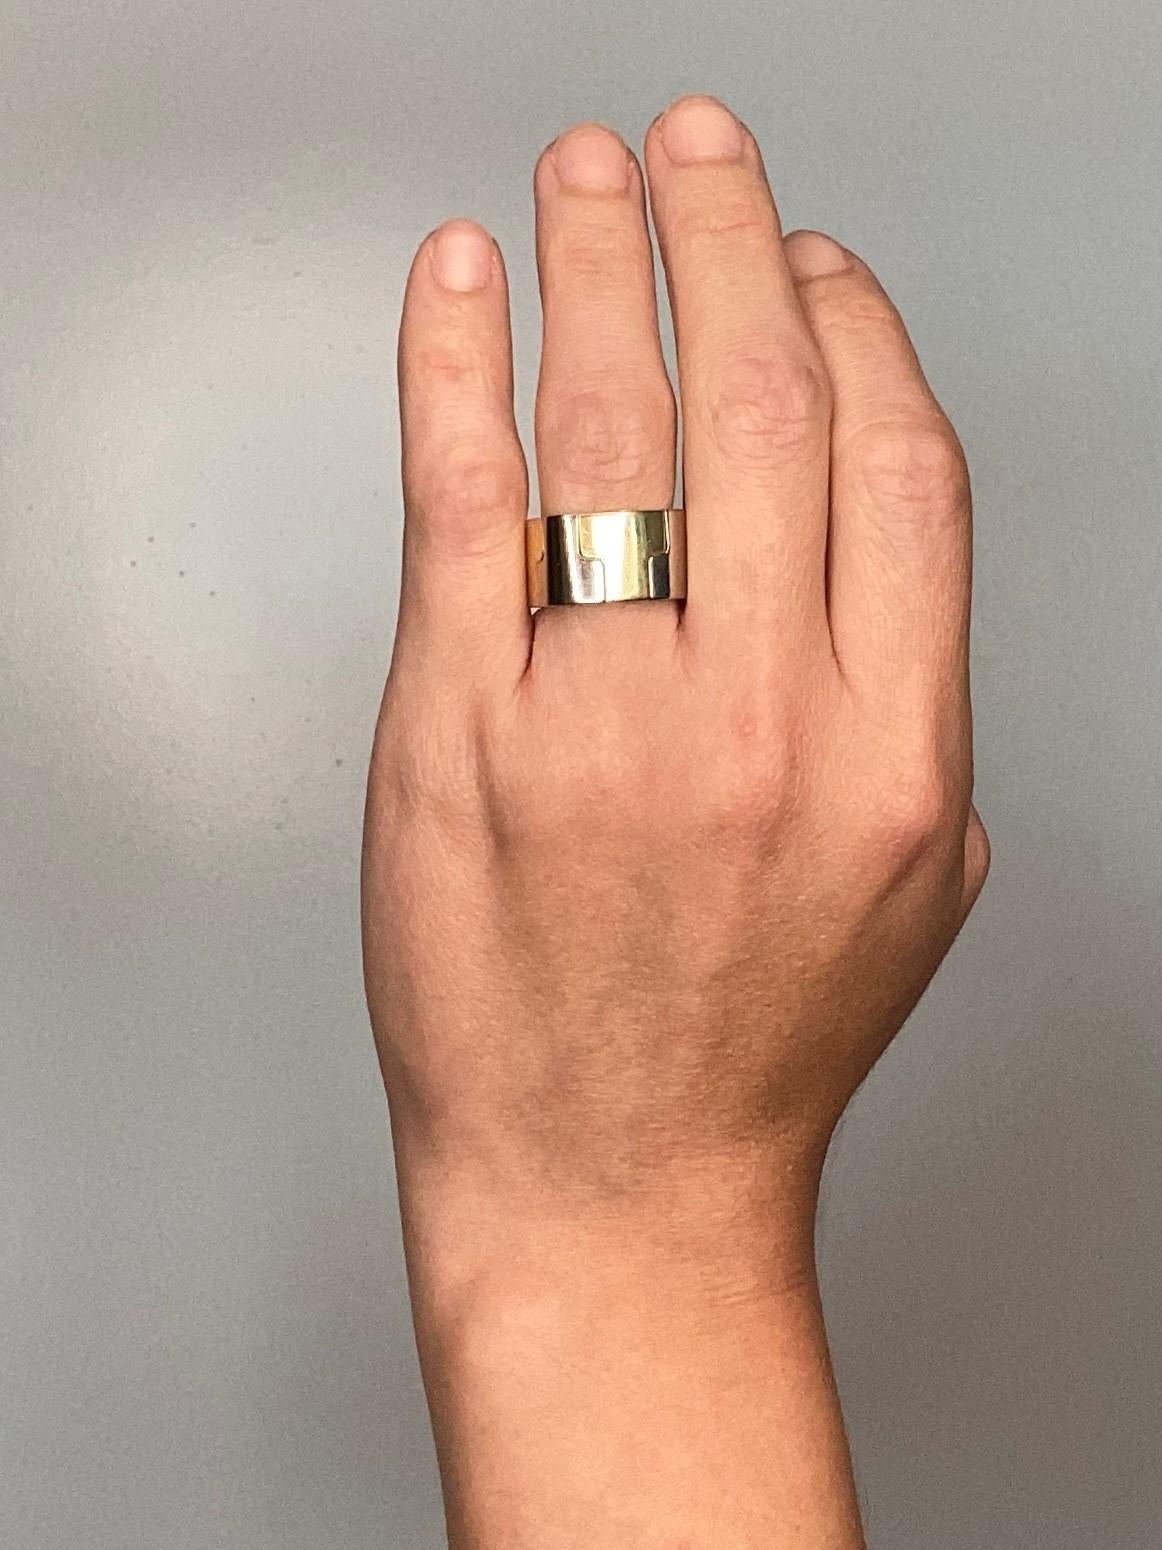 Geometric puzzle ring designed by Paul Binder for Gubelin.

Beautiful sculptural and sleek piece made in Zurich Switzerland by Paul Binder for the jewelry house of Gubelin, back in the 1970's. This unusual geometric ring was crafted with impeccable